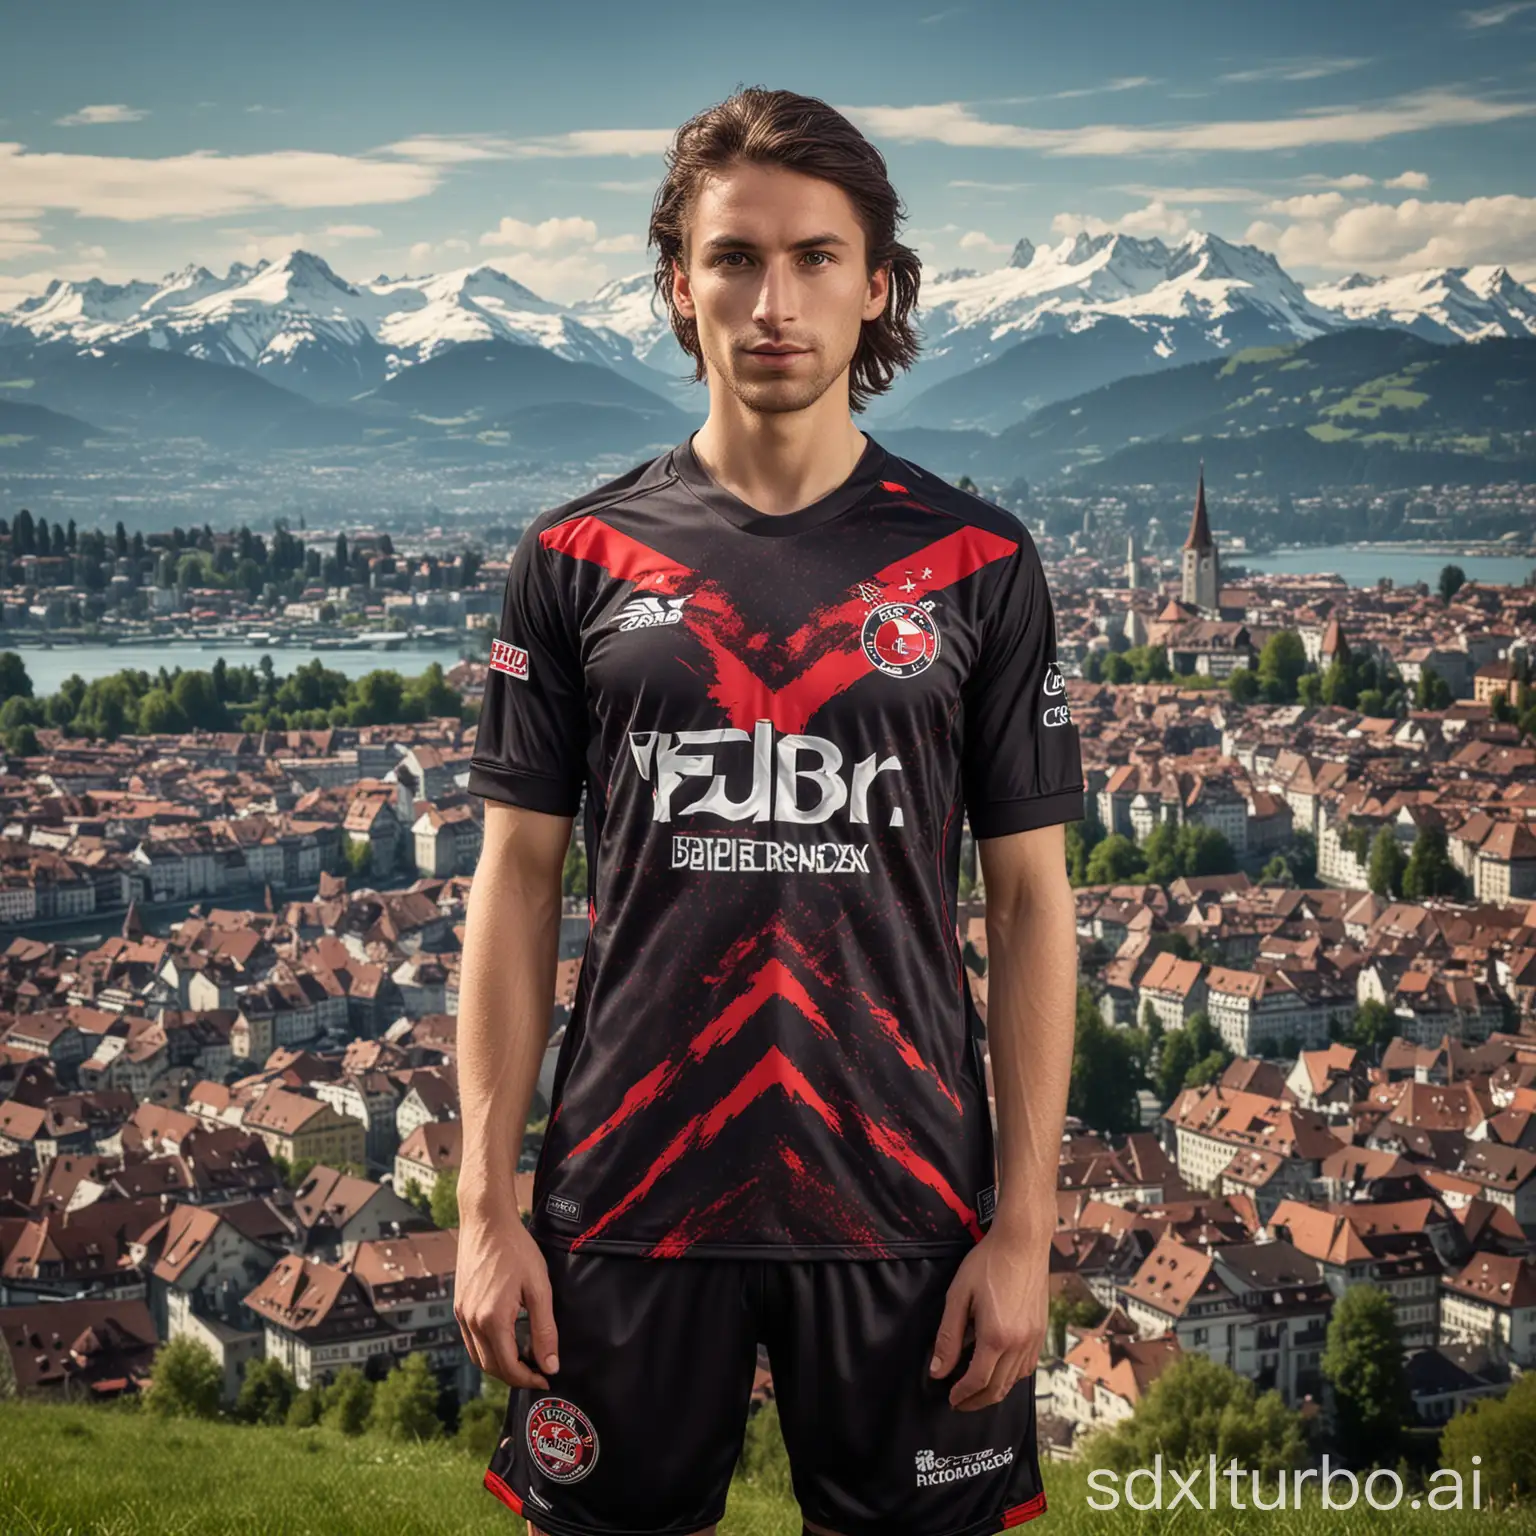 Advertisement for a new soccer jersey, black jersey with red accents. City of Bern in the background